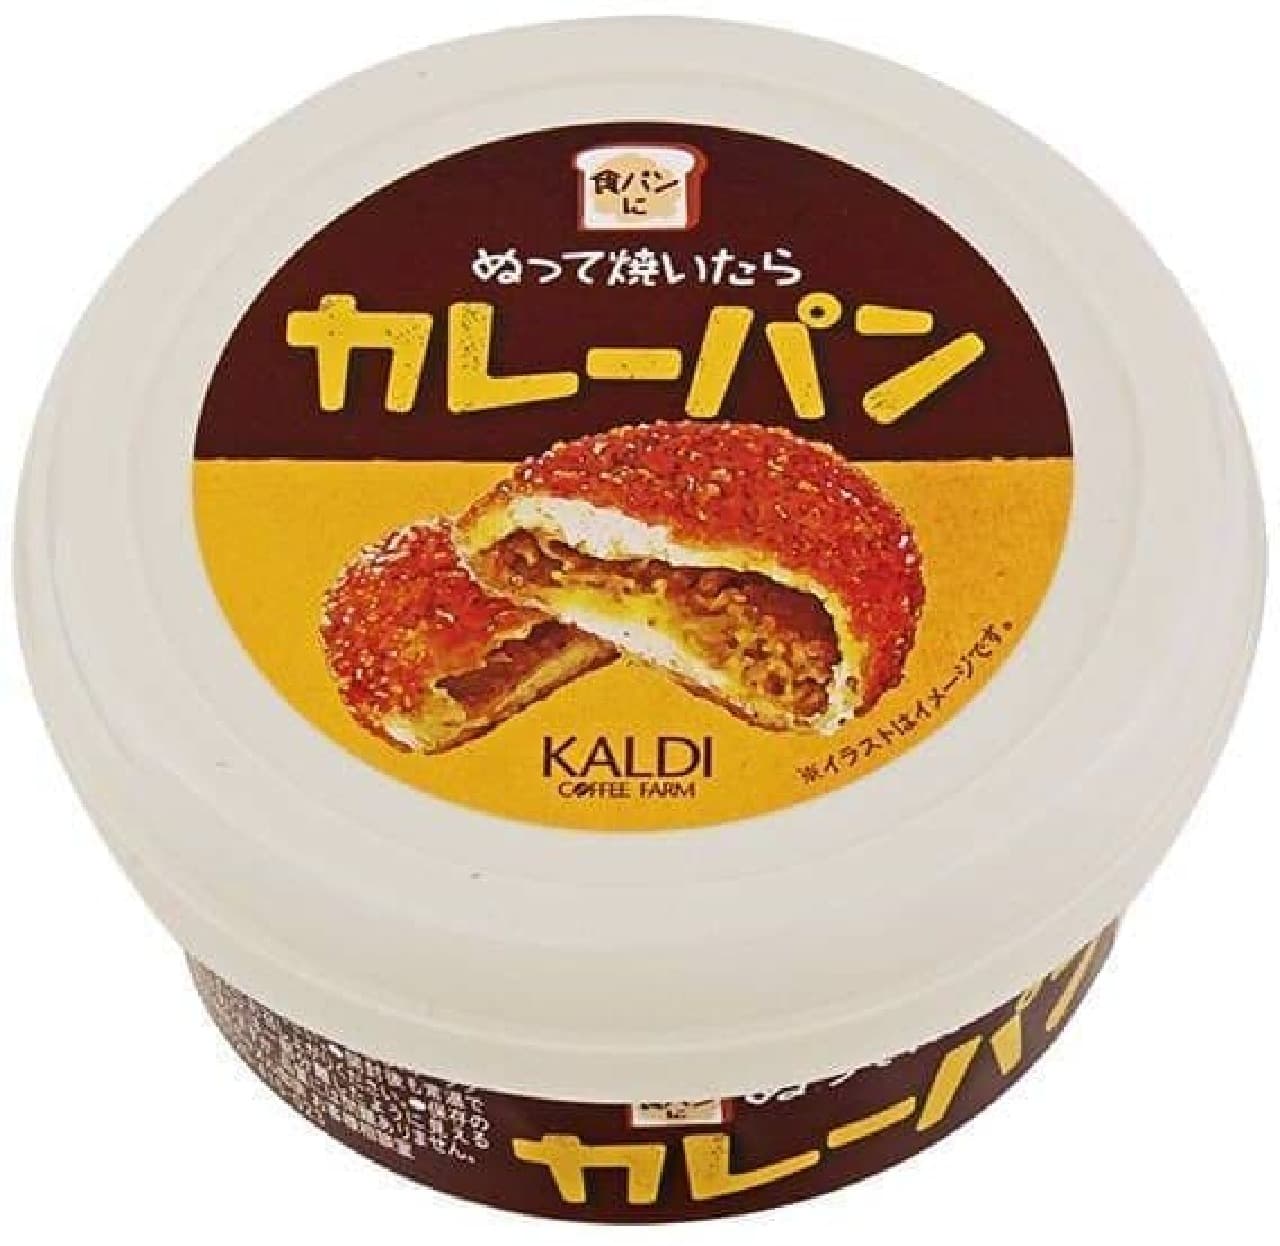 KALDI "Curry bread when baked"